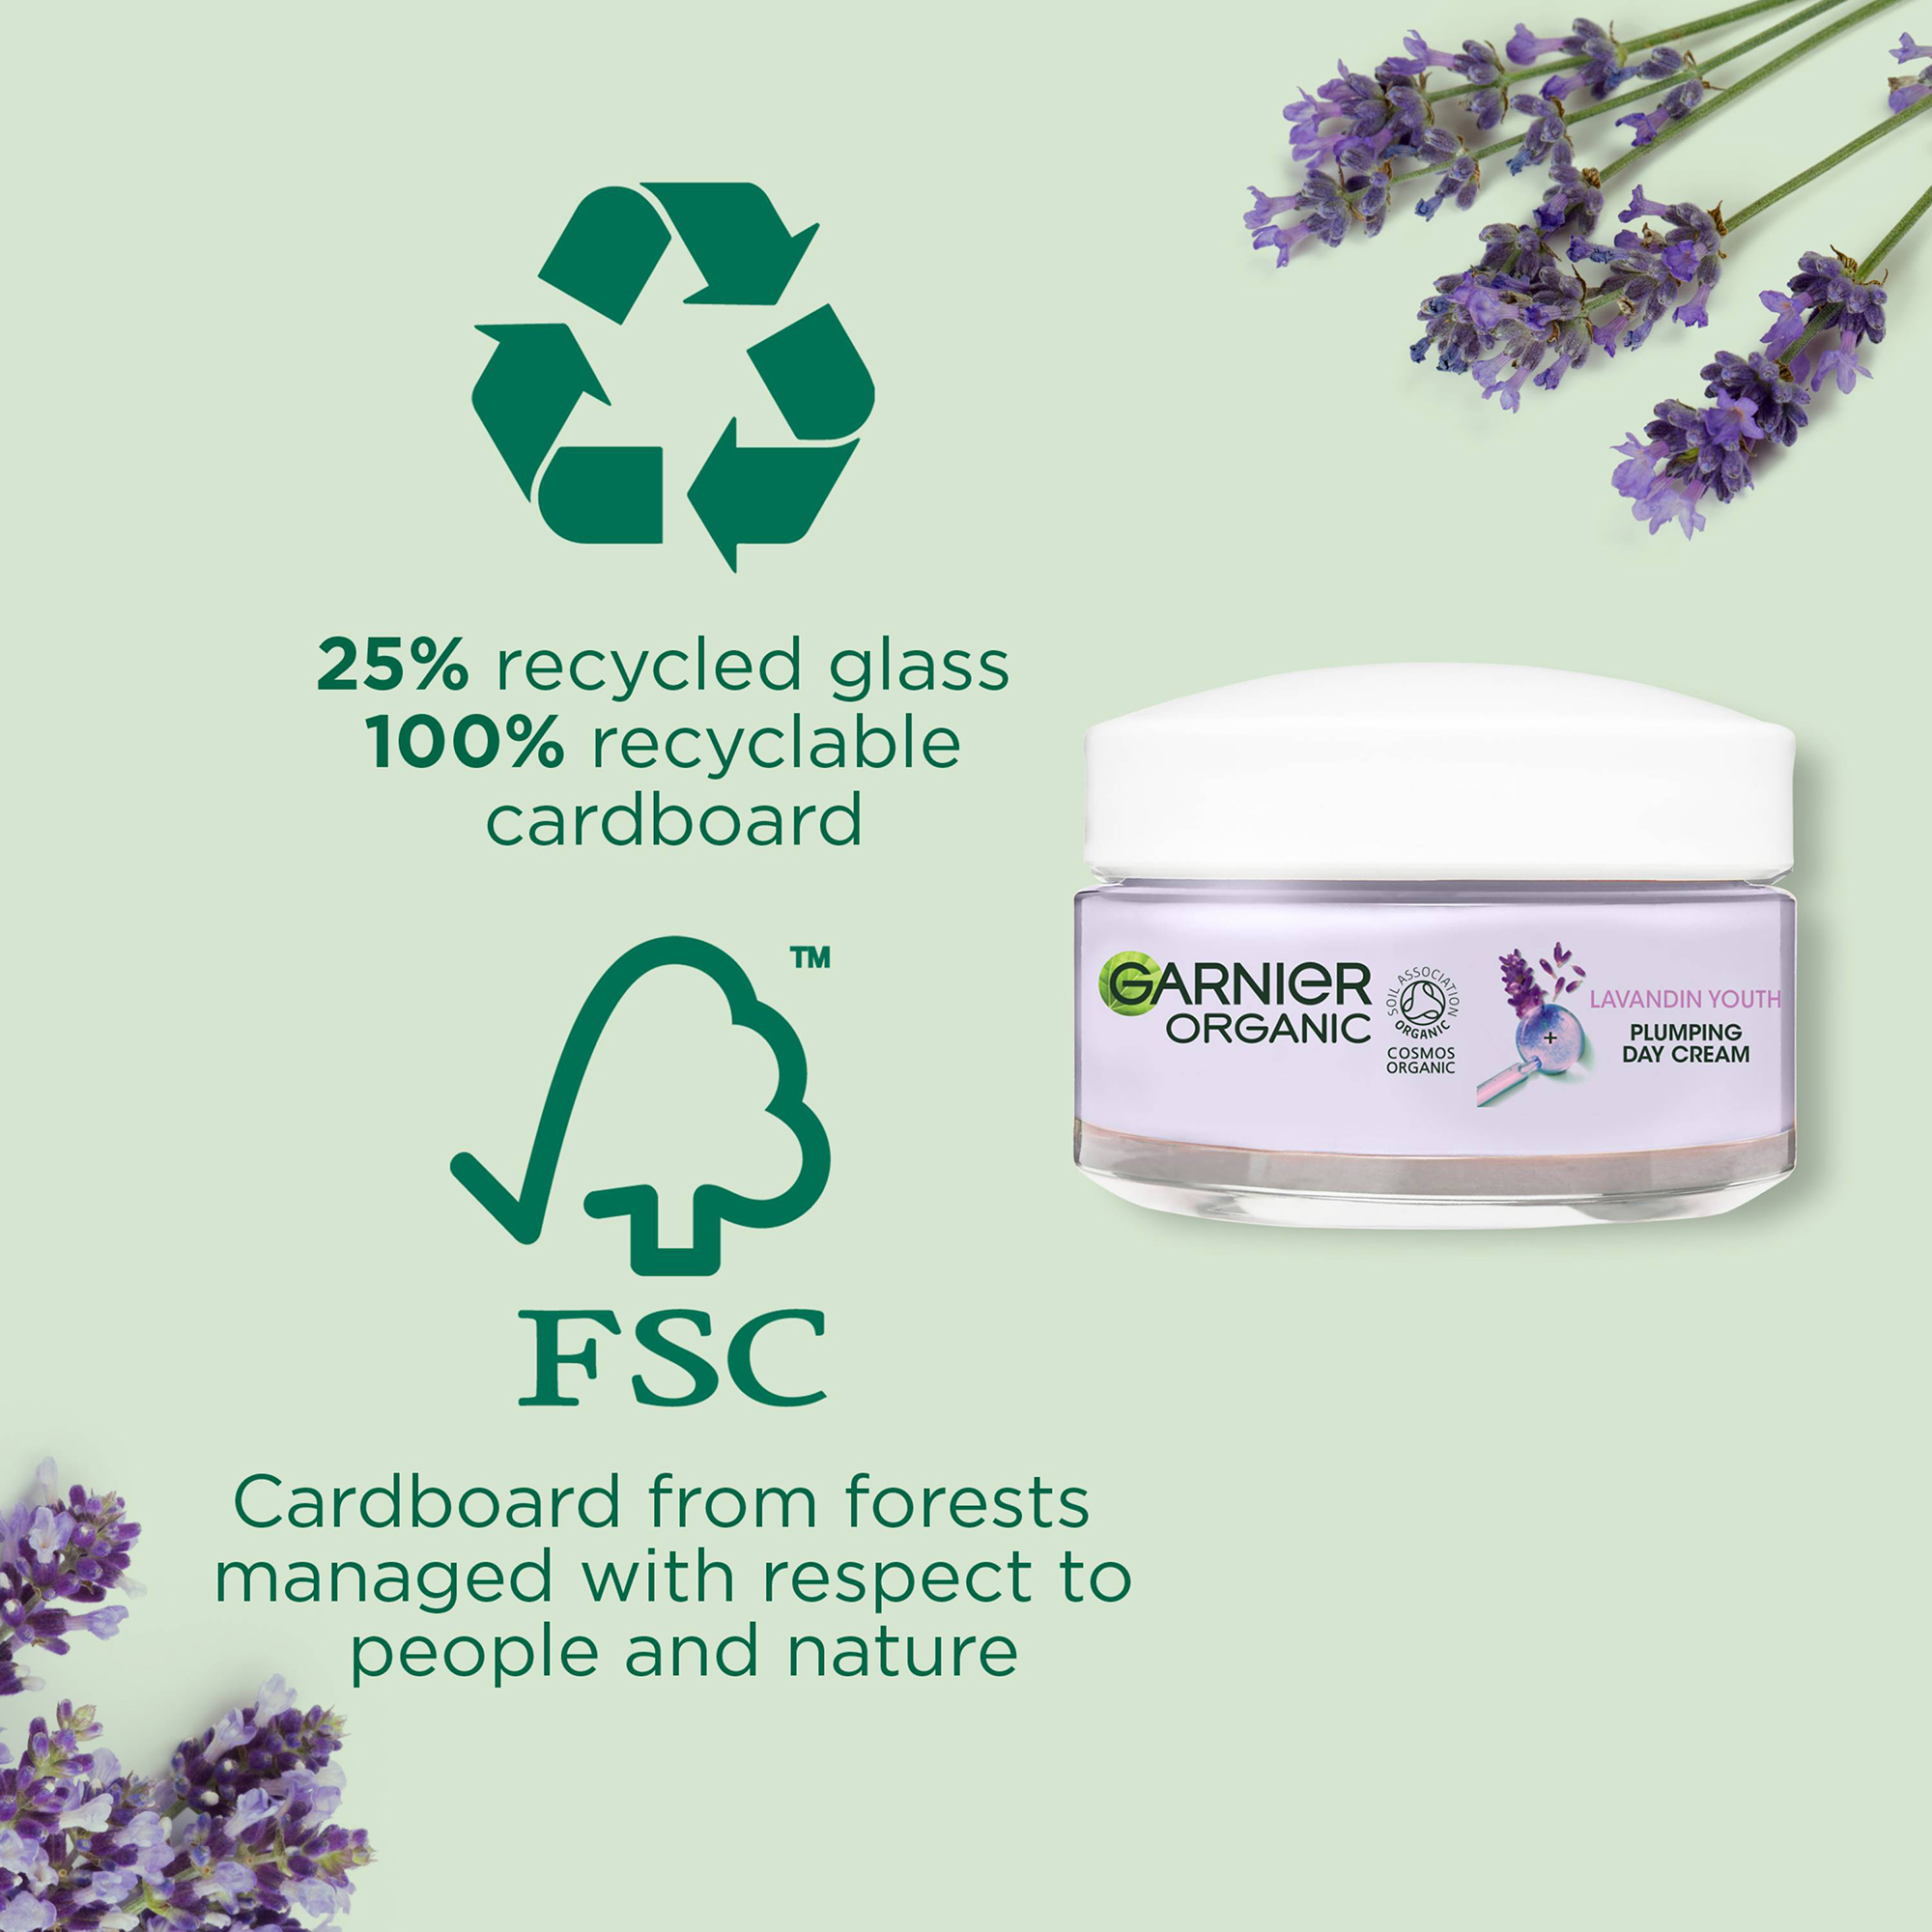 255 recycled glass 100% recyclable cardboard and FSC cardboard from forests managed with respect to people and nature